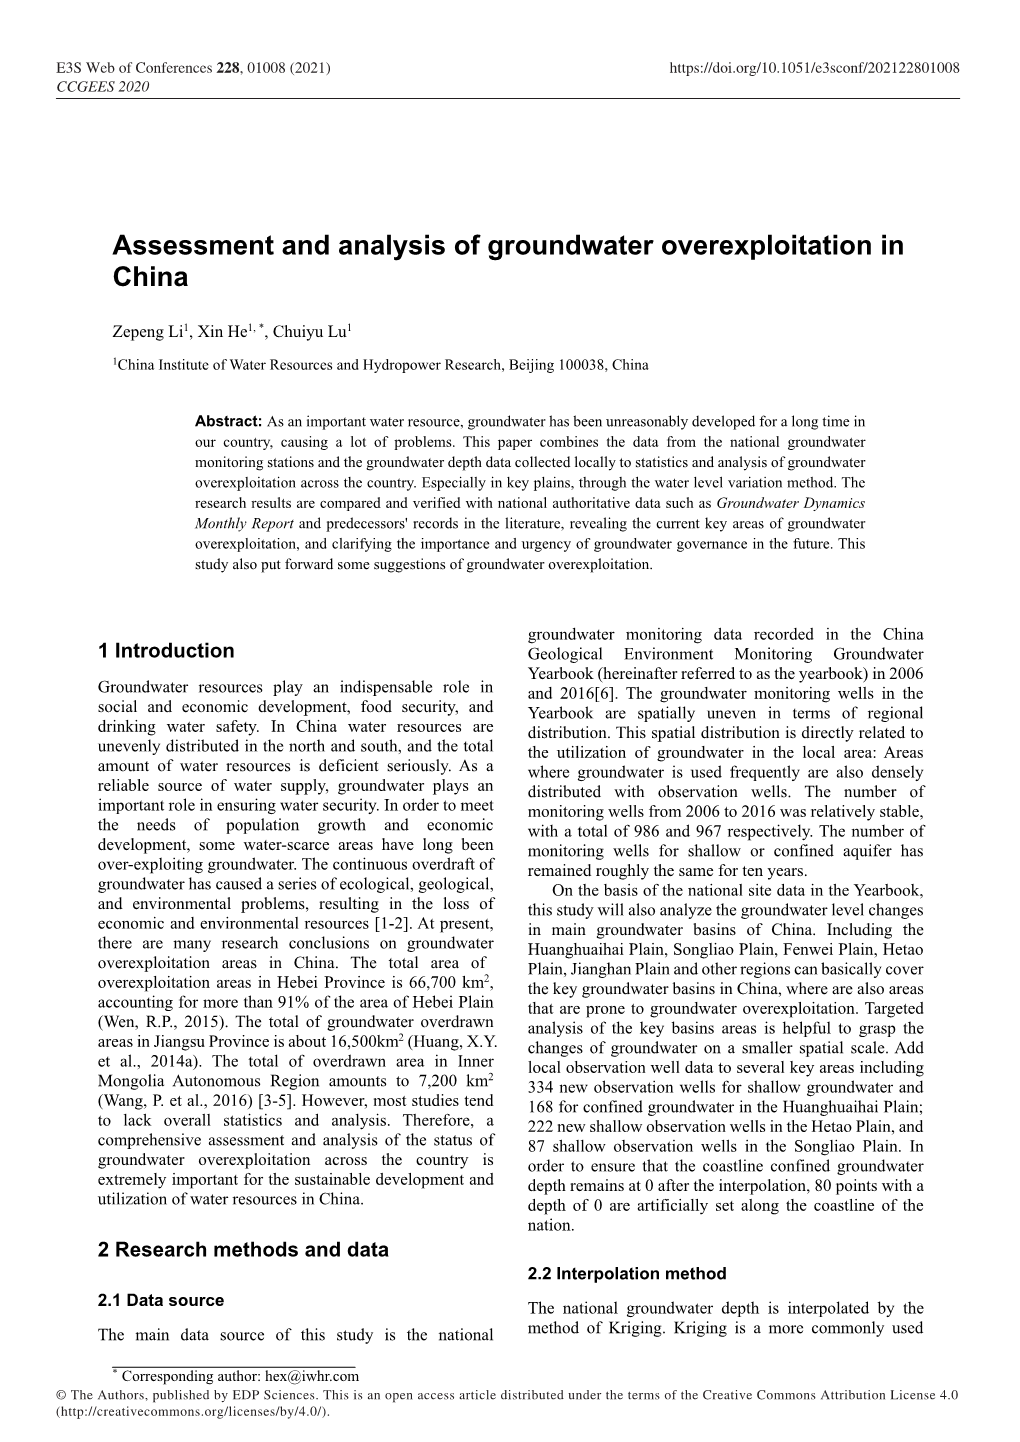 Assessment and Analysis of Groundwater Overexploitation in China